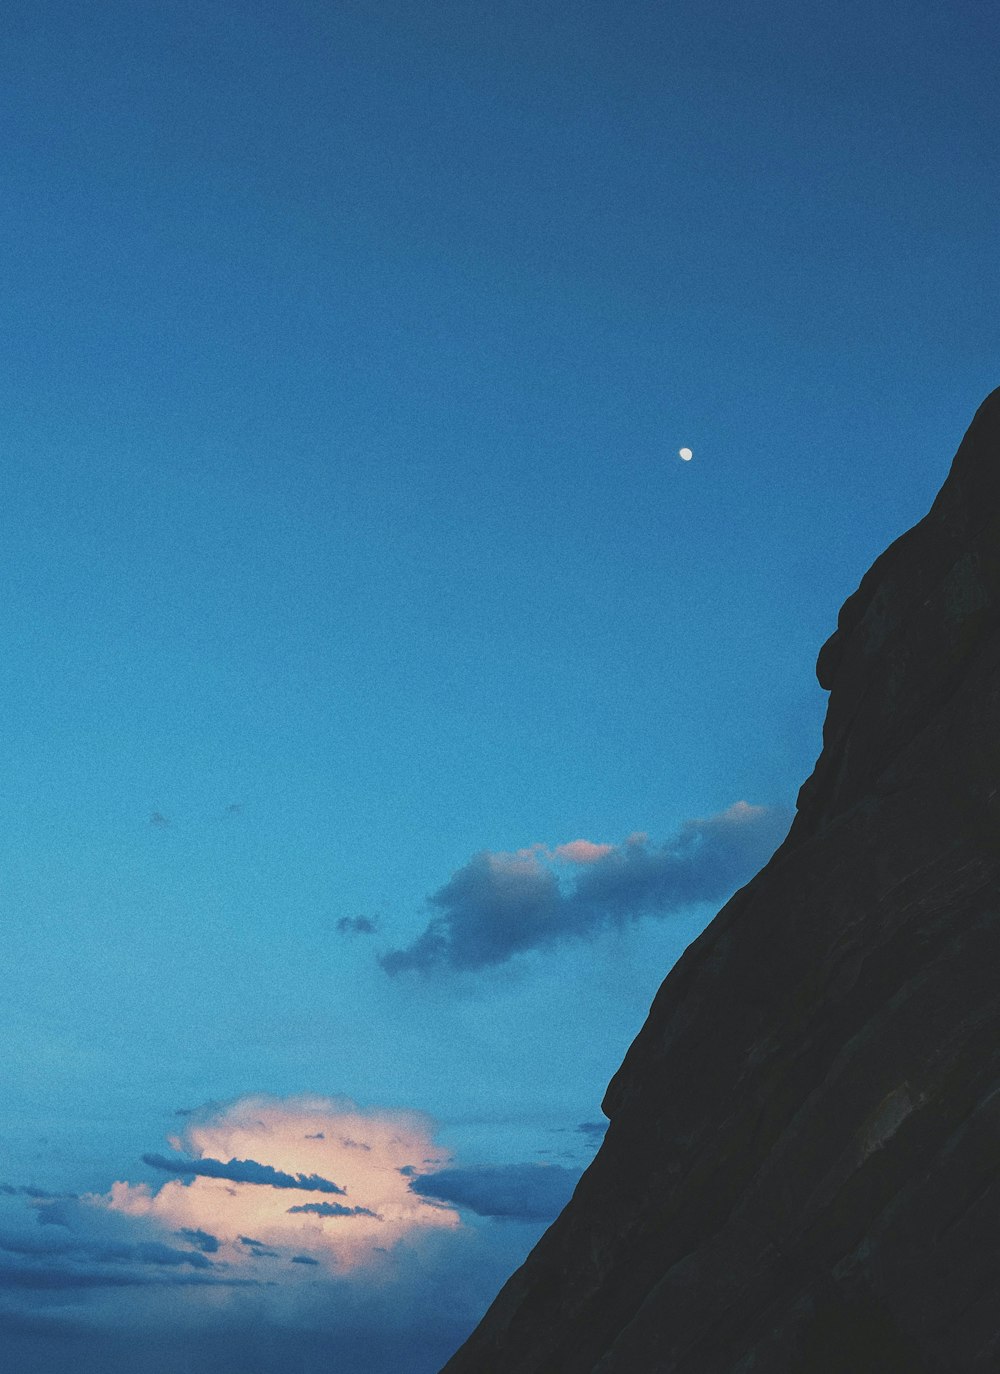 the moon is setting behind a mountain peak